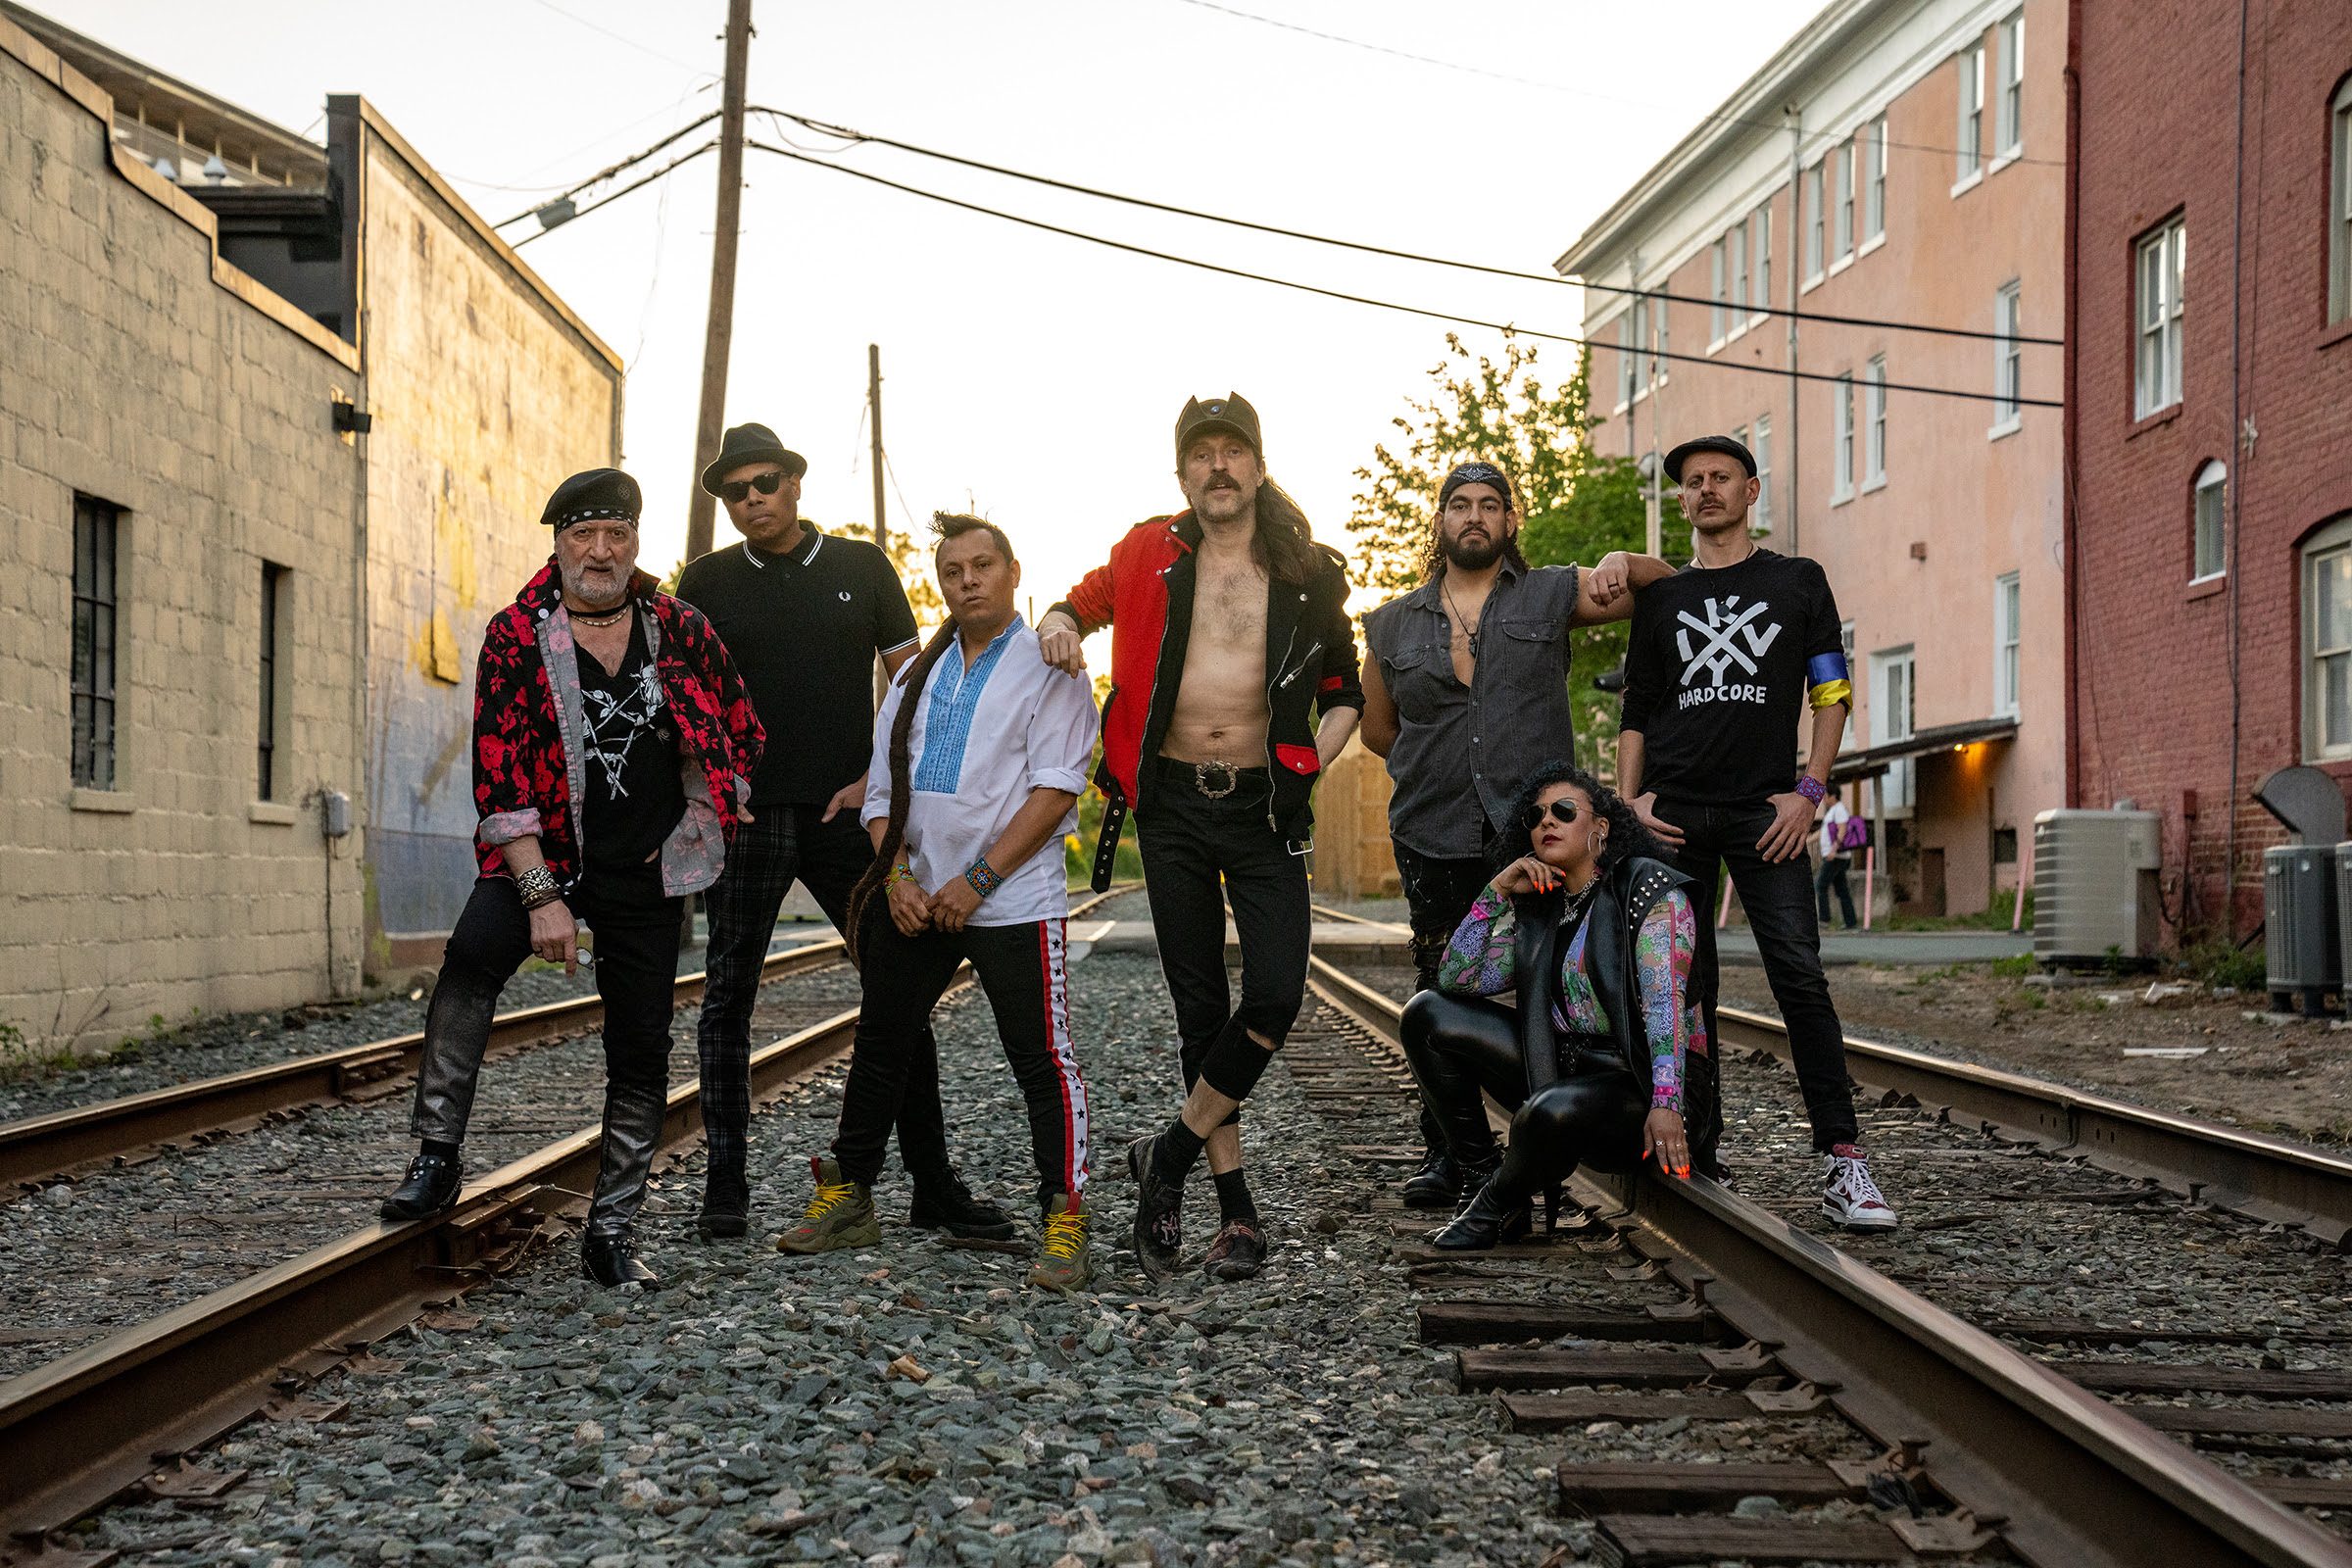 Gogol Bordello Shares Fiery New Song & Video “Take Only What You Can Carry”